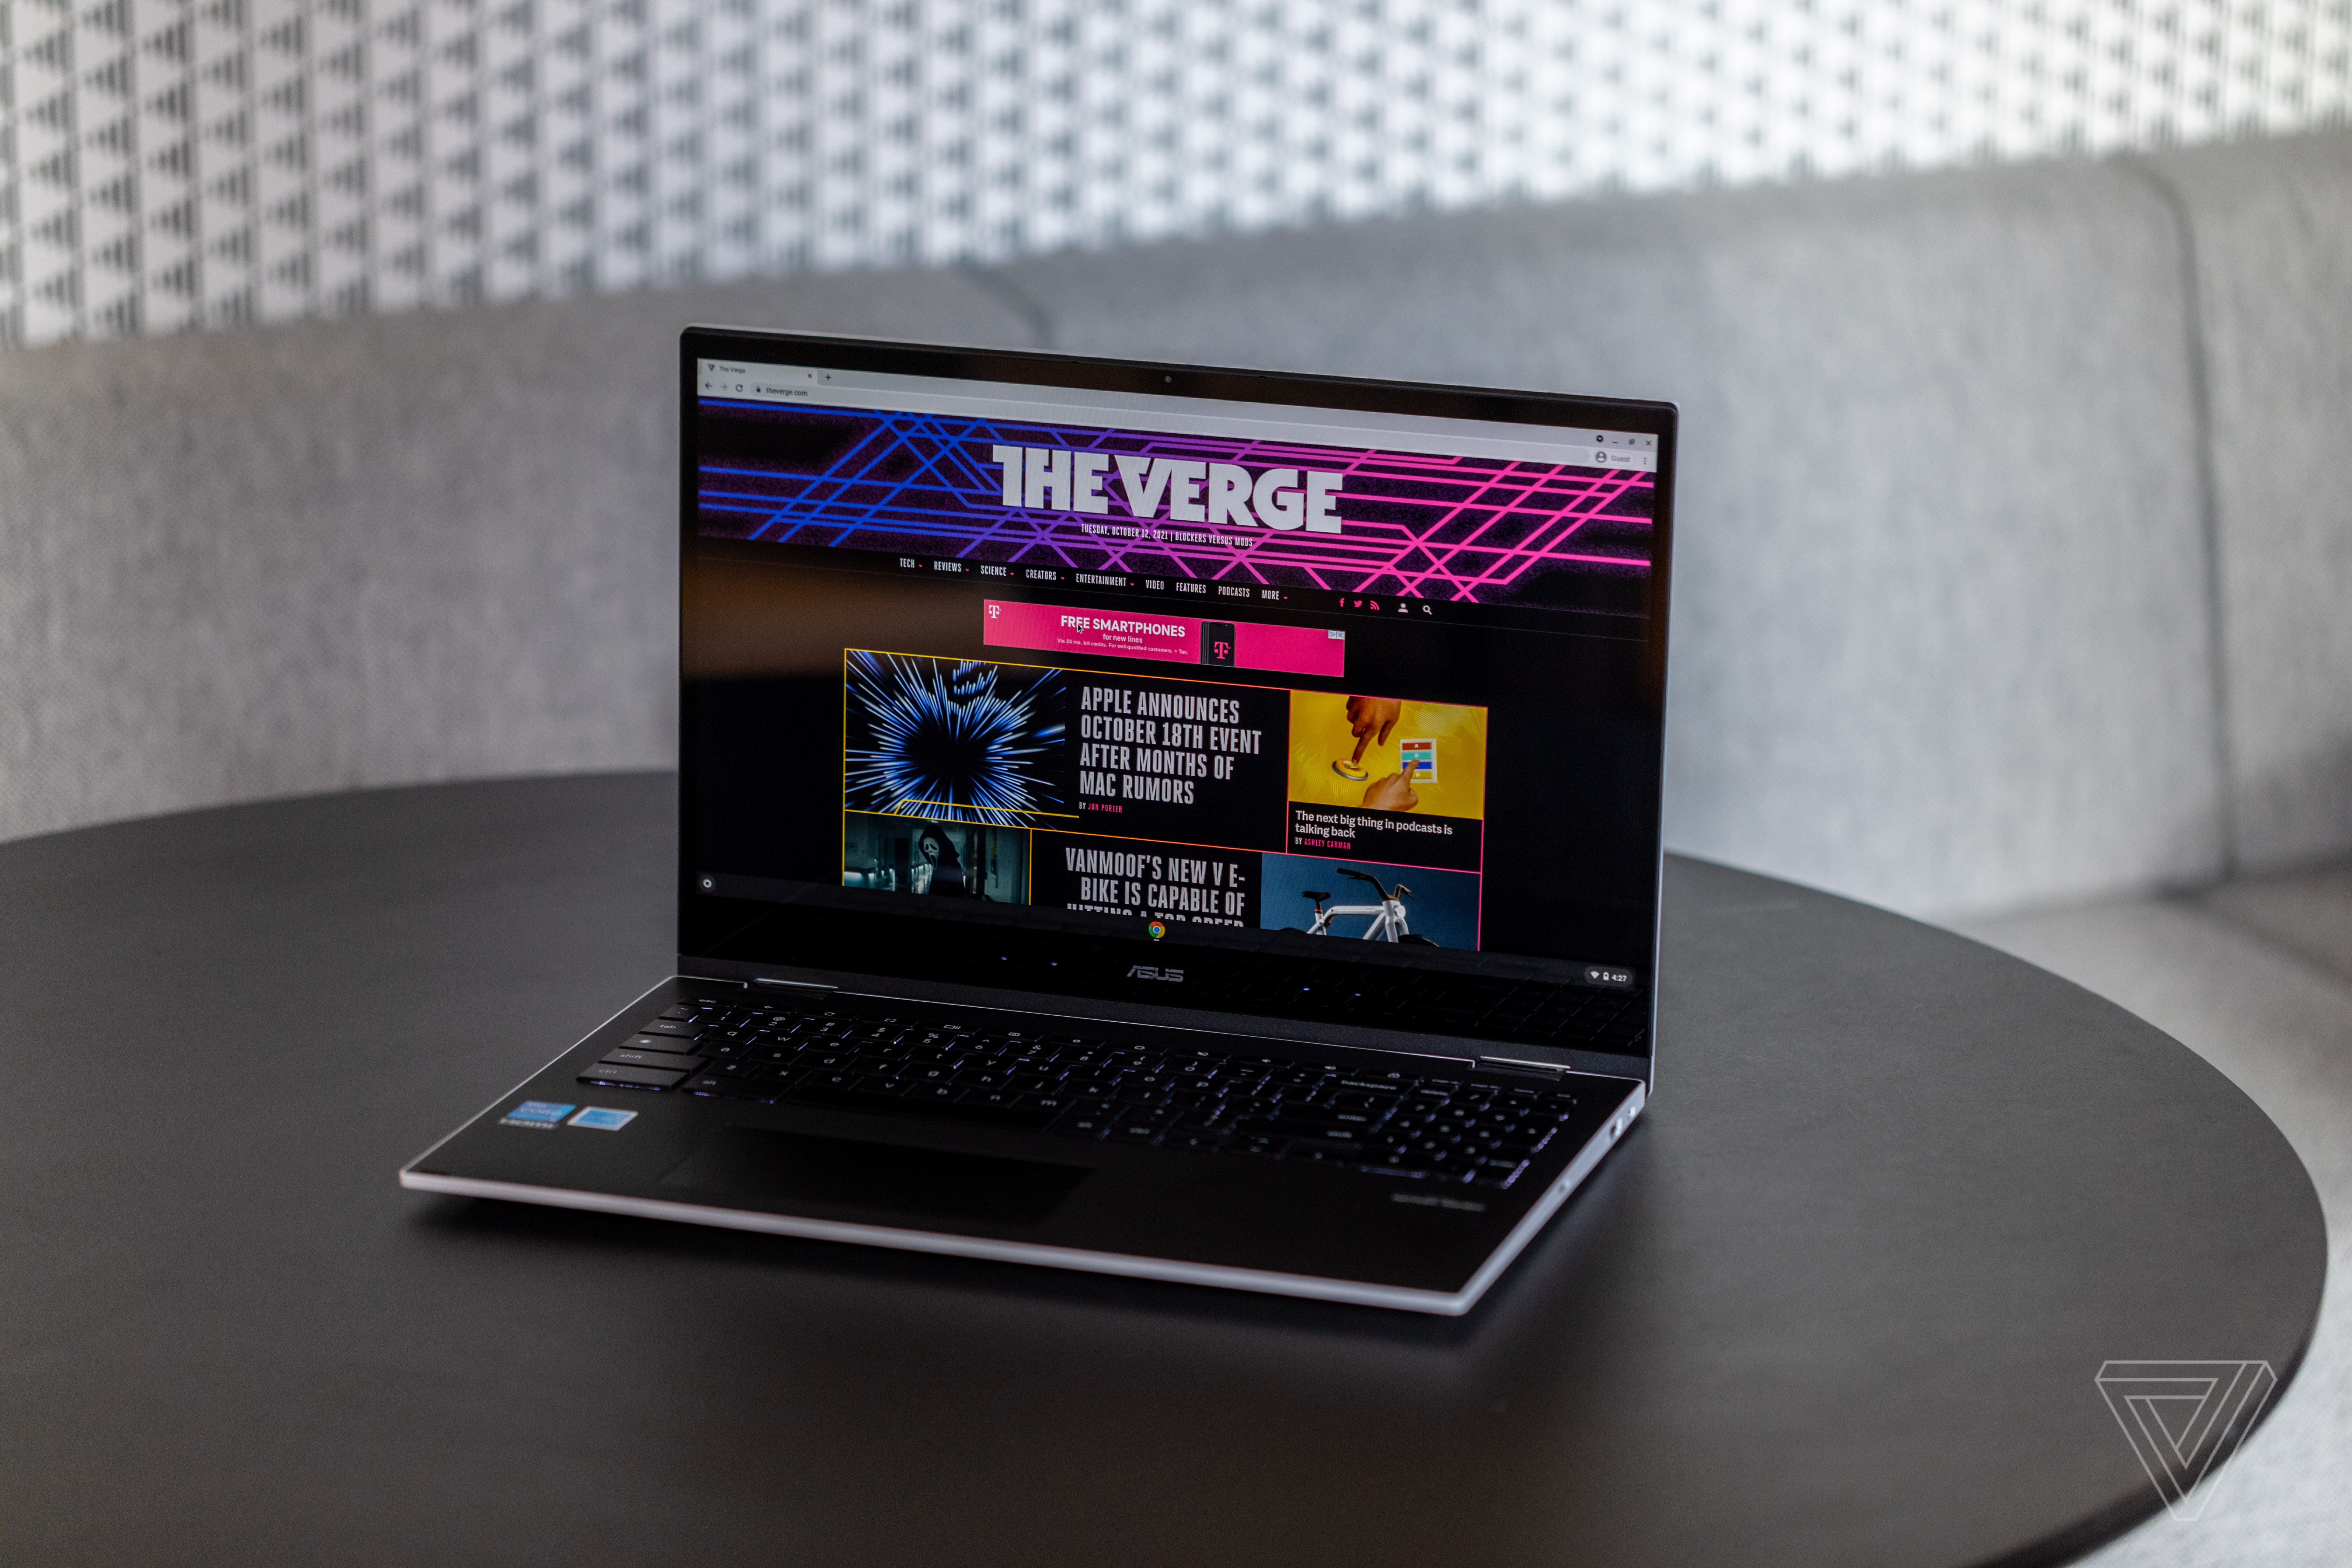 The Asus Chromebook Flip CX5 open on a black table, angled to the left, with a gray fabric bench and white textured wall in the background. The screen displays The Verge homepage.